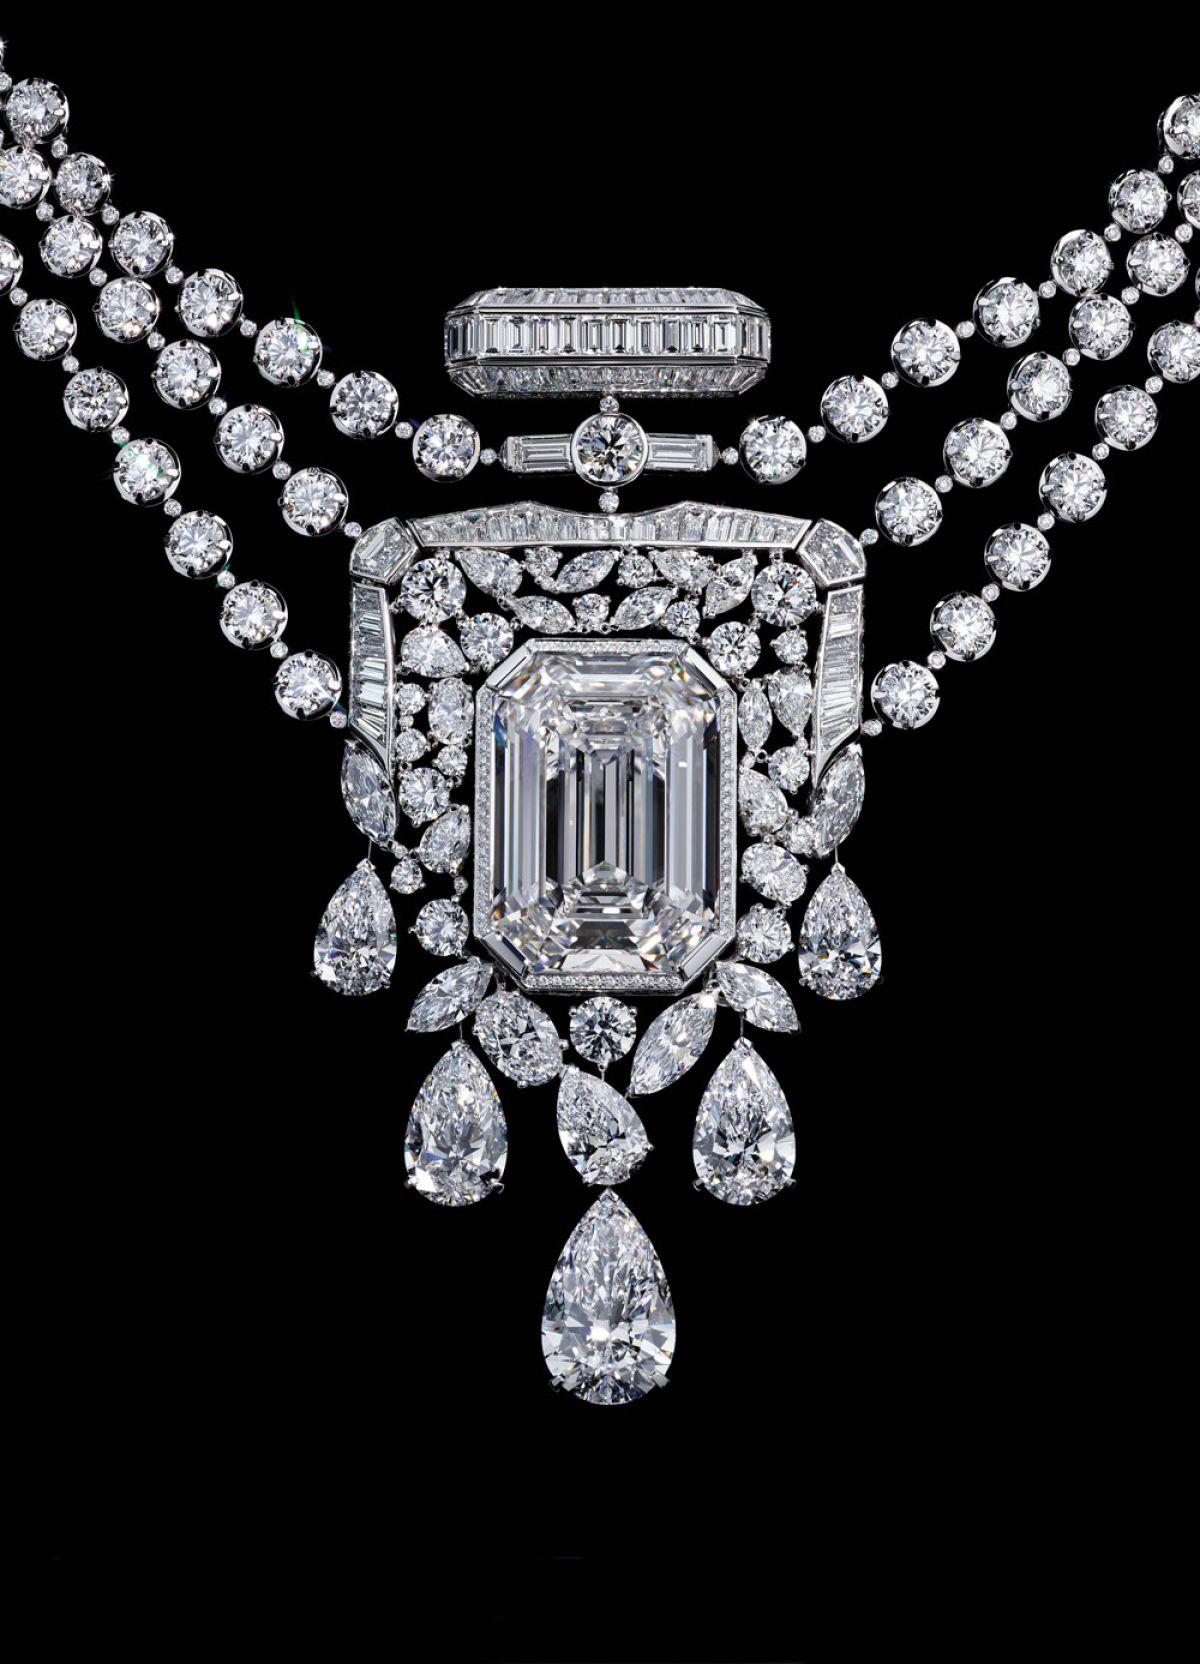 Chanel celebrates the 100th anniversary of the No 5 perfume with a  55.55-carat diamond necklace akin to the bottle - Luxurylaunches